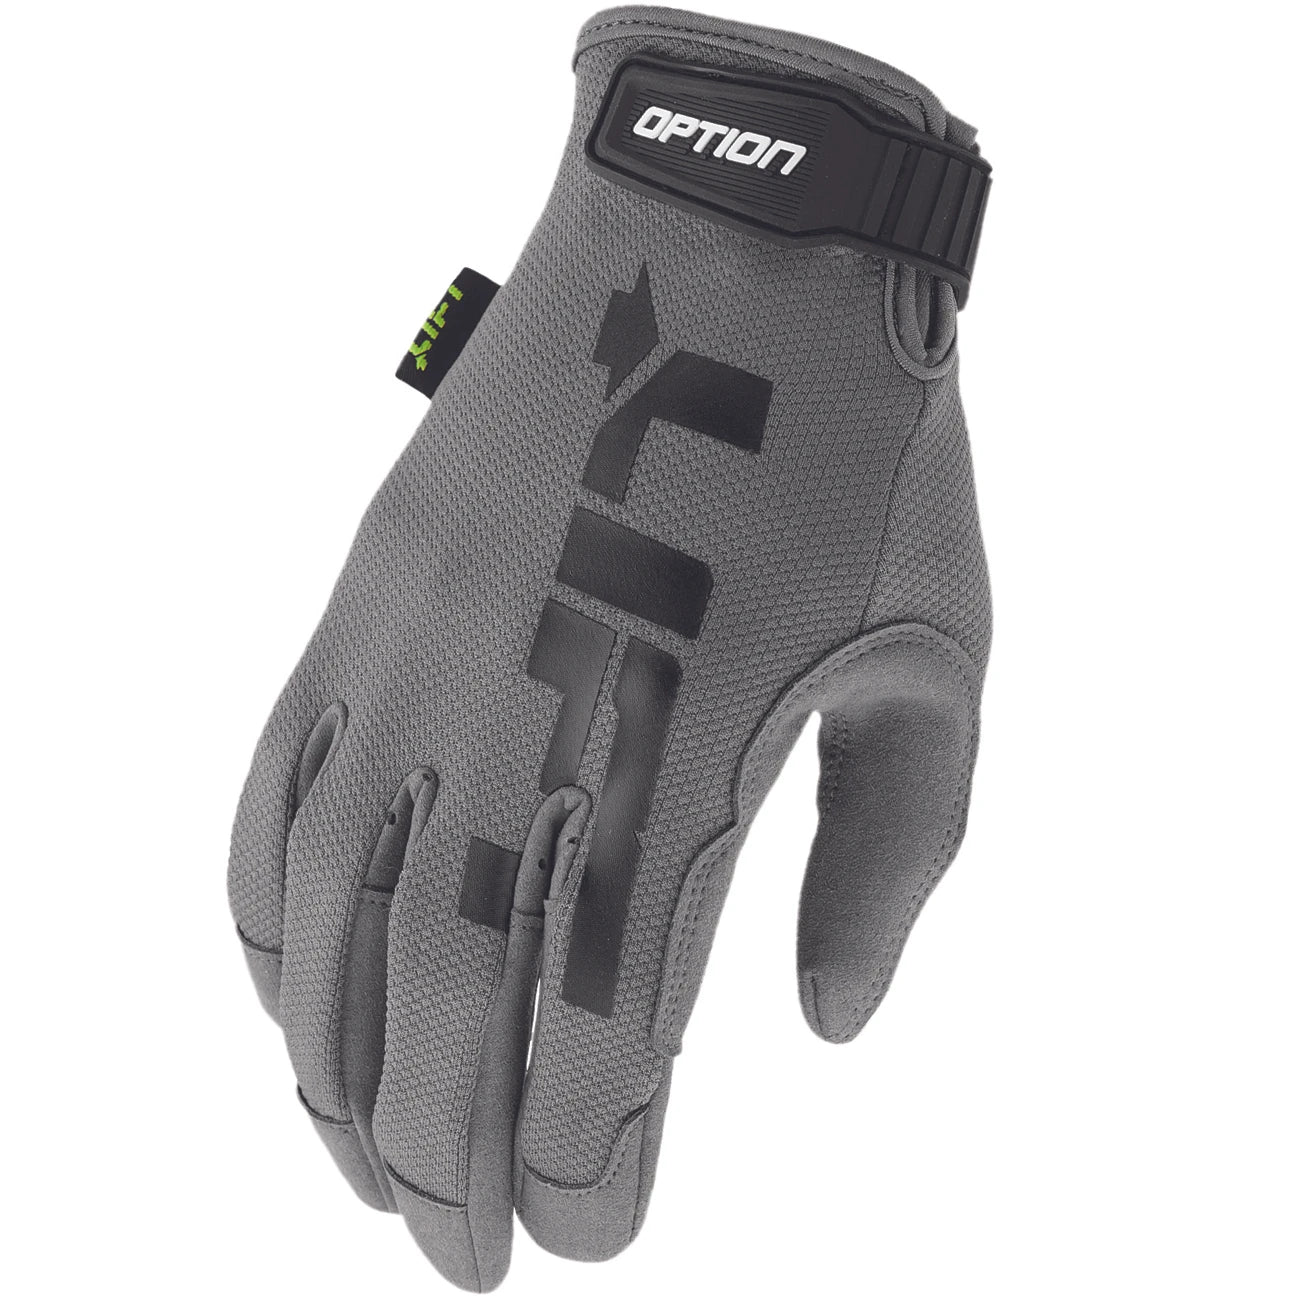 LIFT OPTION Glove (Grey)- Synthetic Leather with Air Mesh